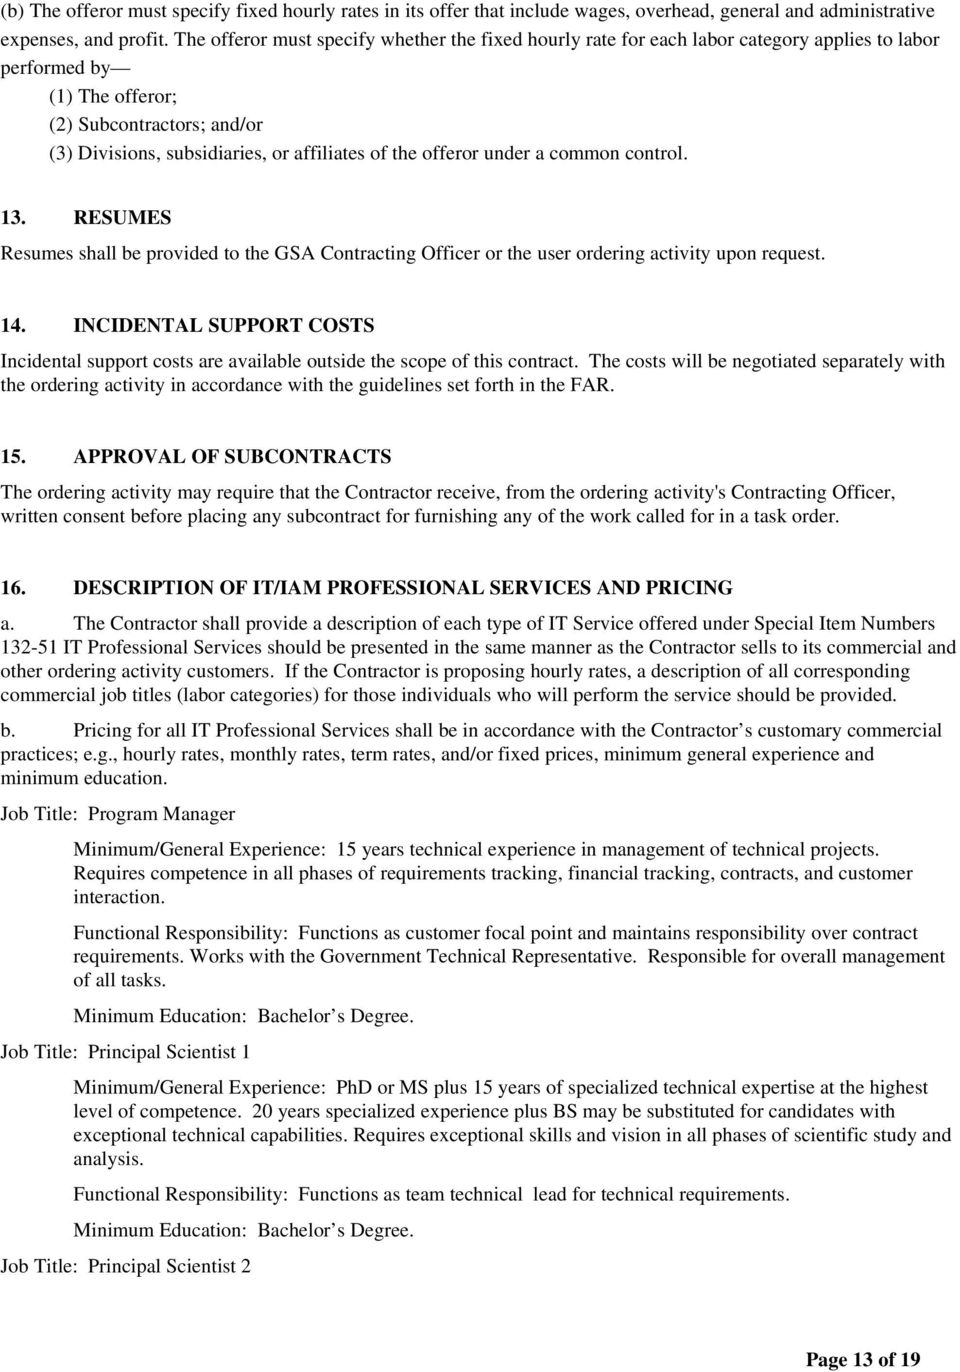 the offeror under a common control. 13. RESUMES Resumes shall be provided to the GSA Contracting Officer or the user ordering activity upon request. 14.